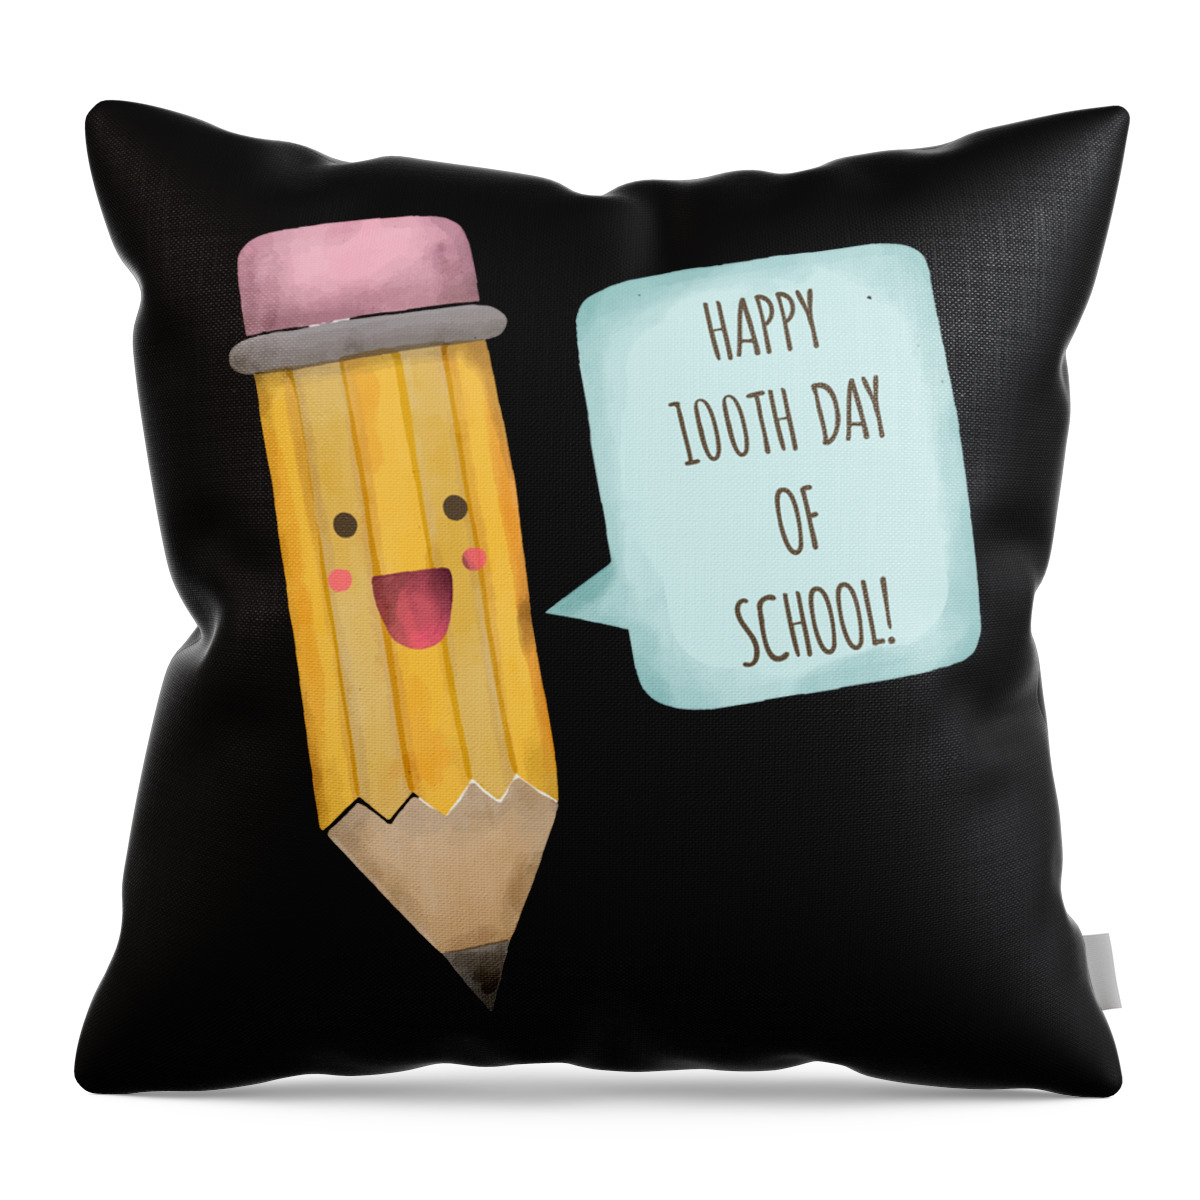 Funny Throw Pillow featuring the digital art Happy 100th Day Of School by Flippin Sweet Gear